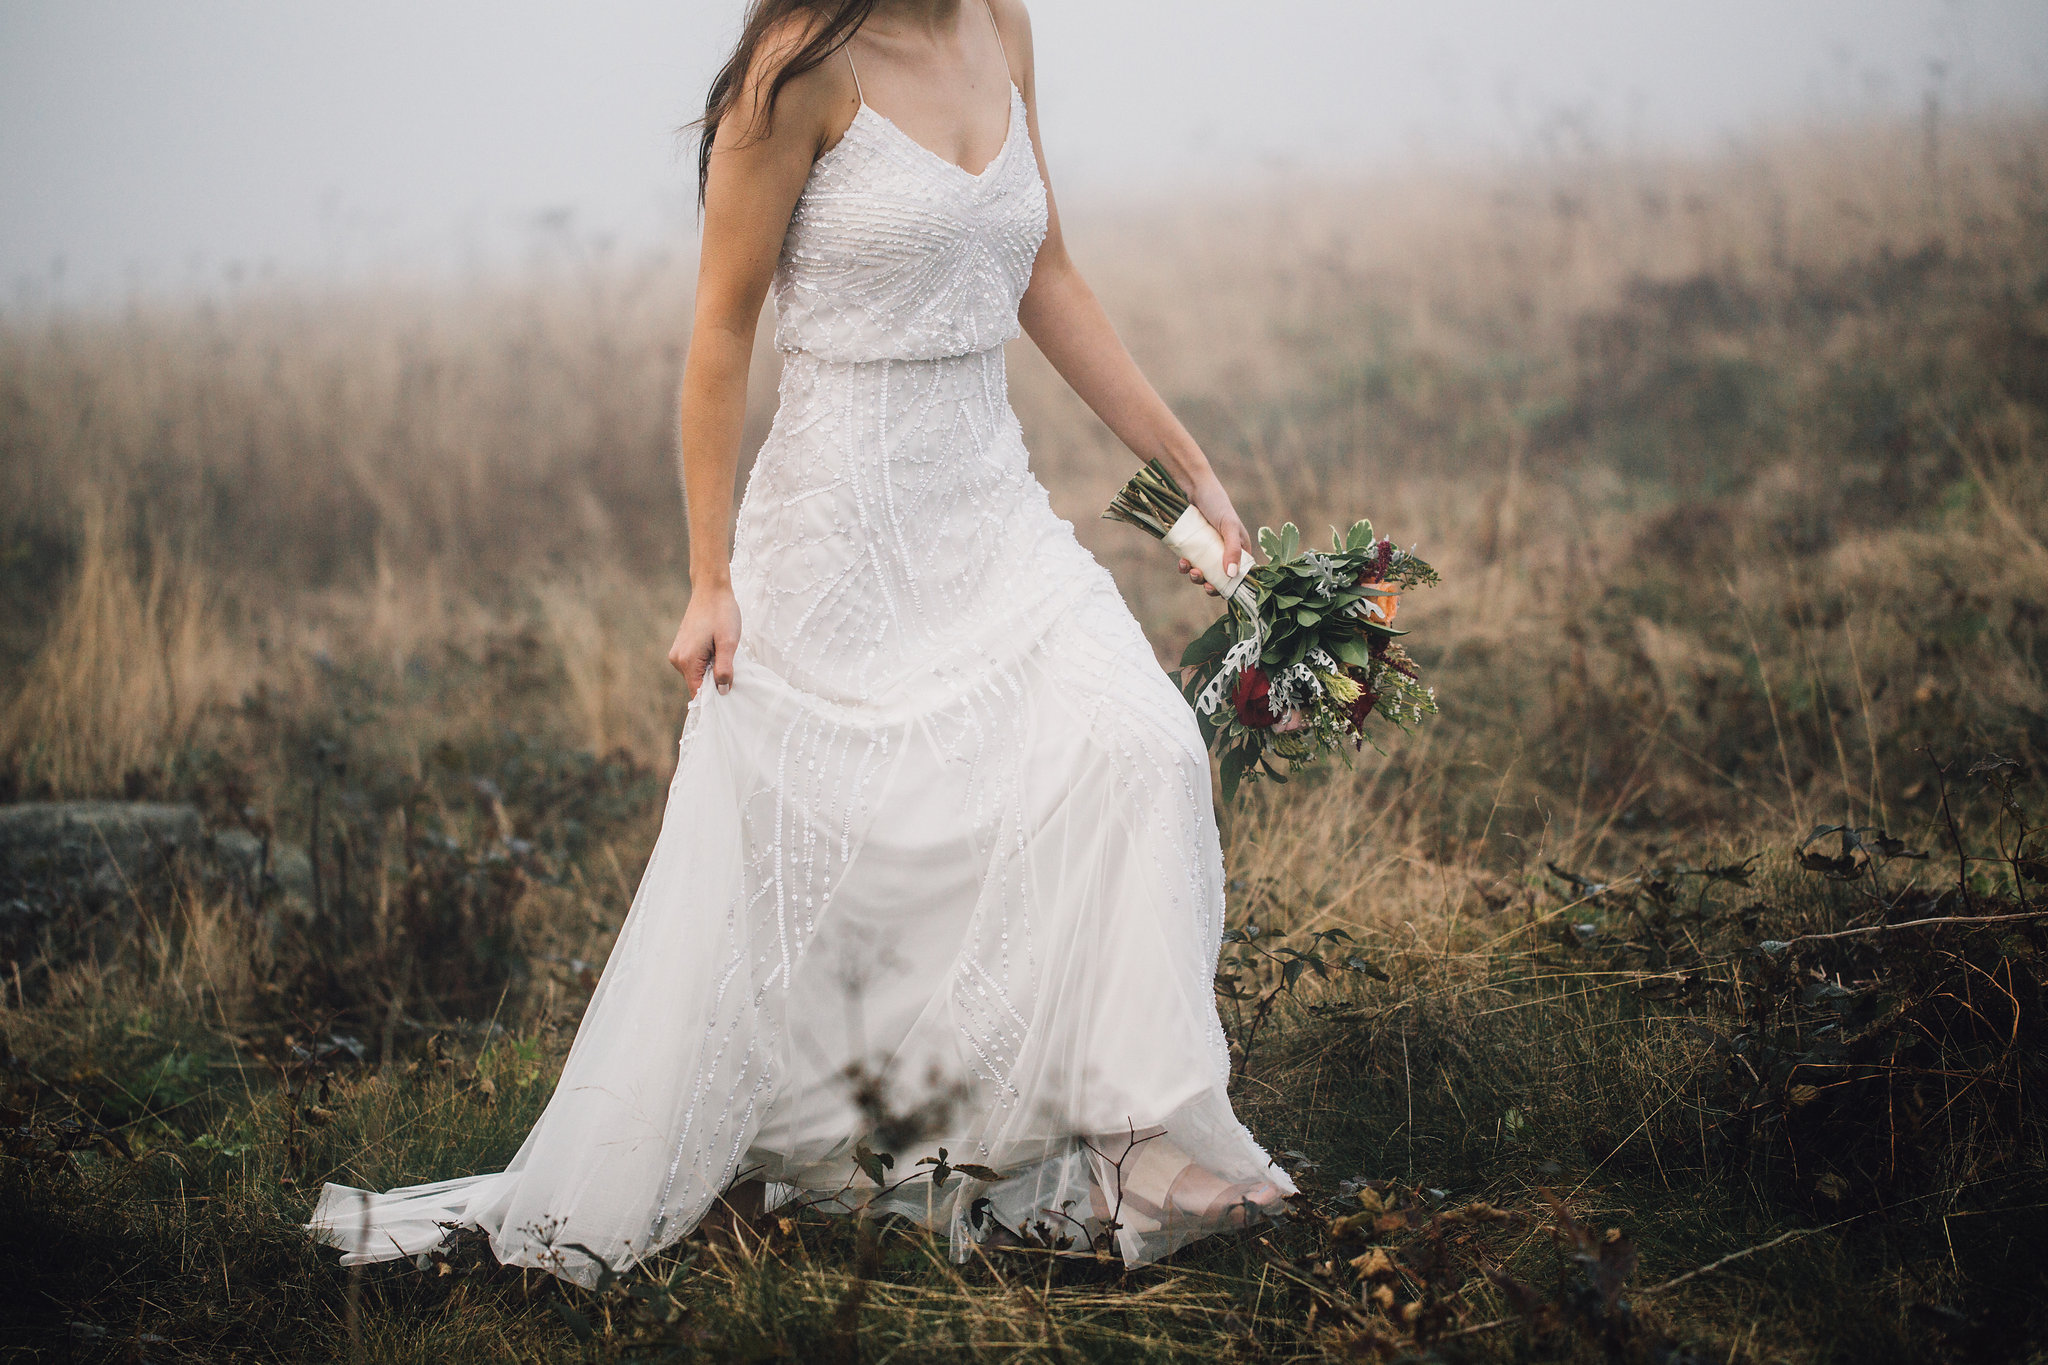 Intimate Wedding at Carver’s Gap, Roan Mountain in Tennessee